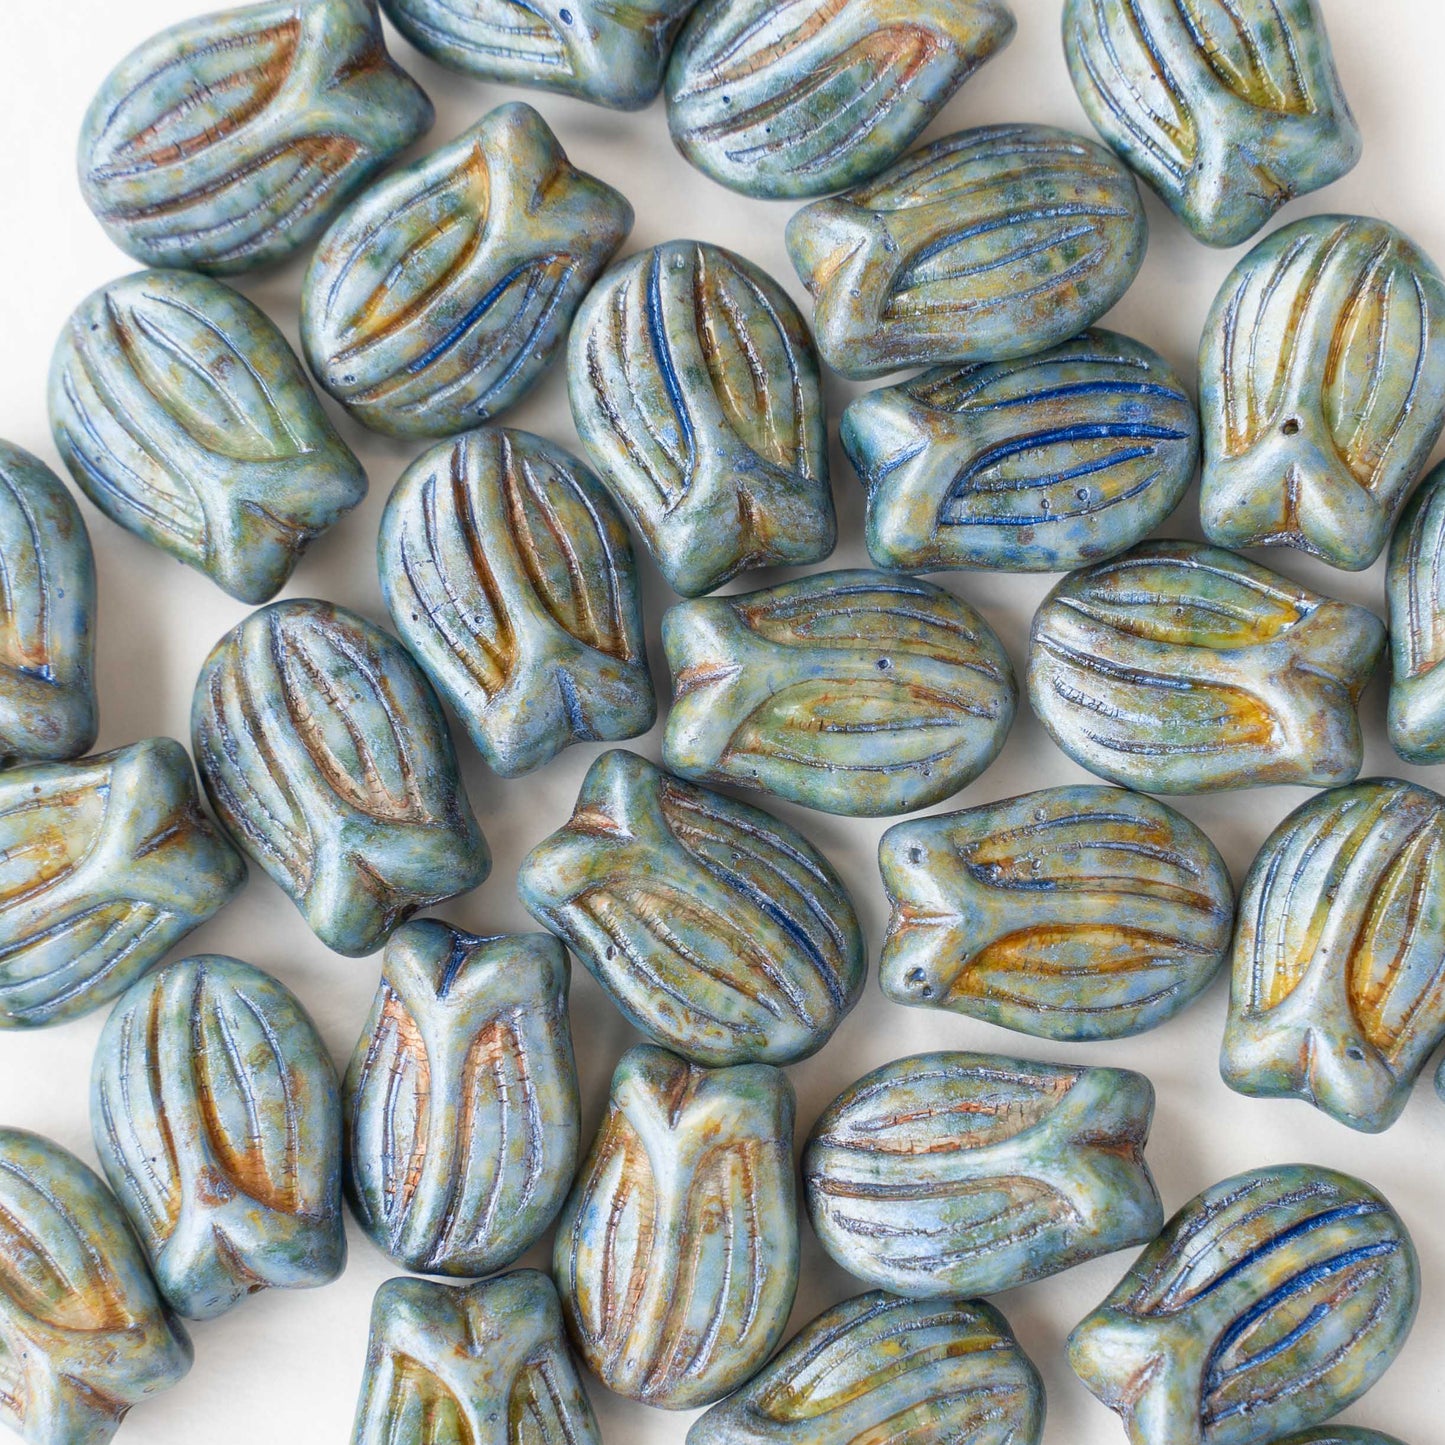 16mm Tulip Flower Beads - Blue Picasso - 6 or 18